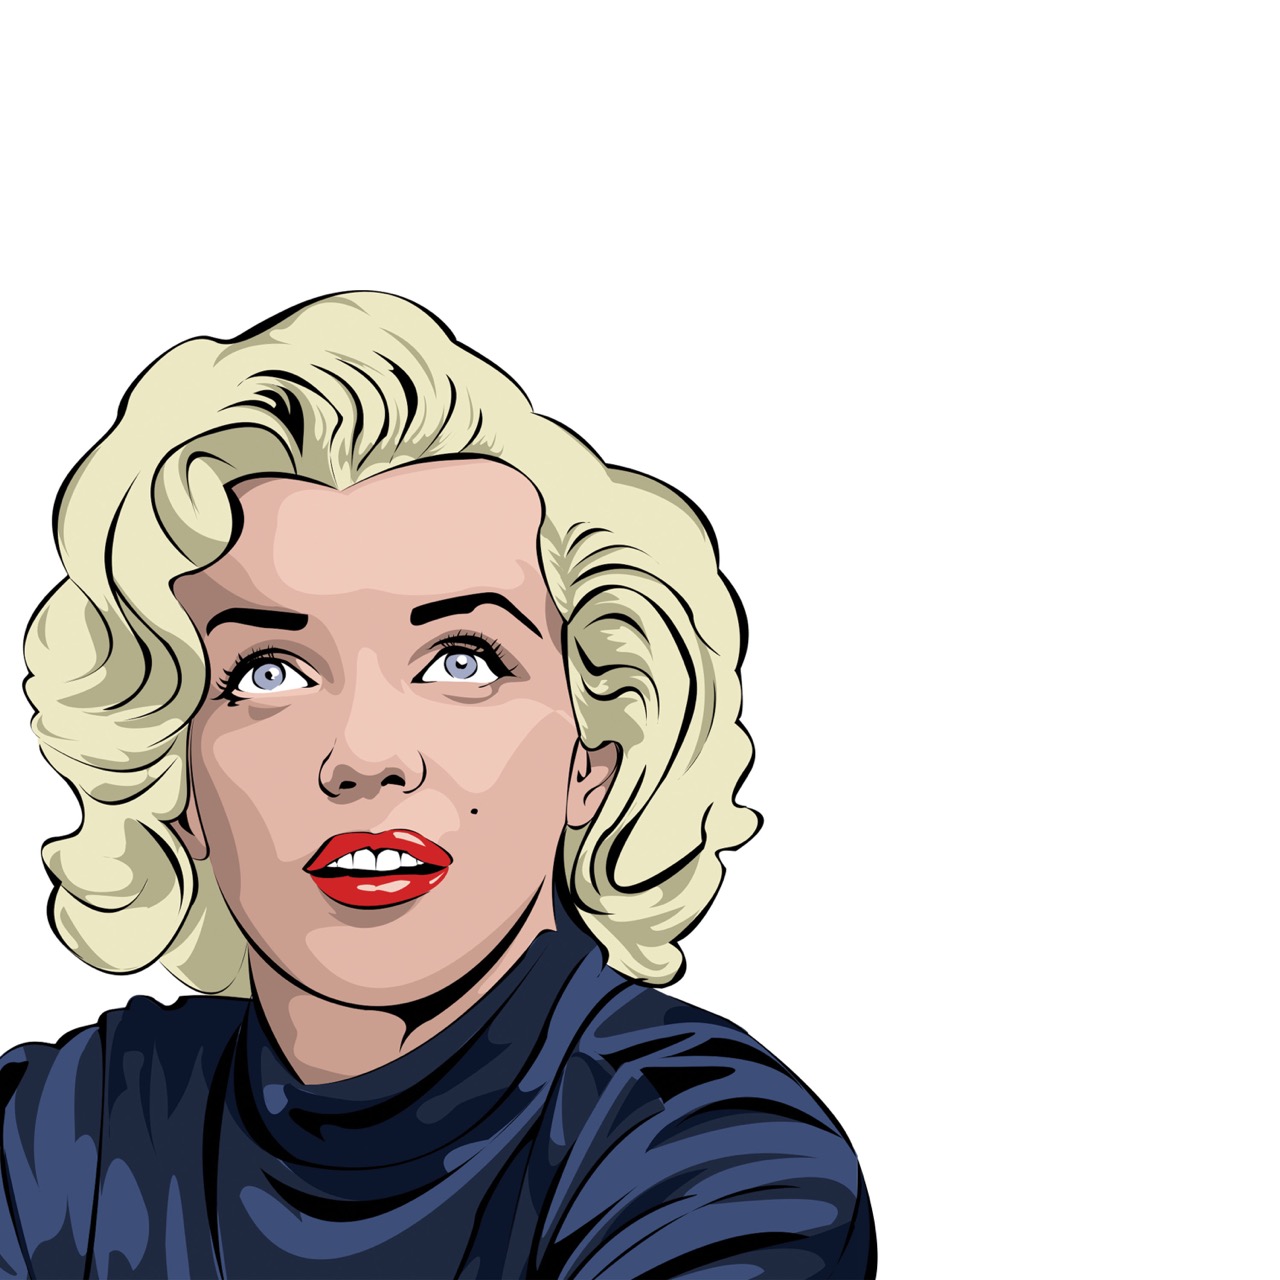 Do You Know Marilyn Monroe?